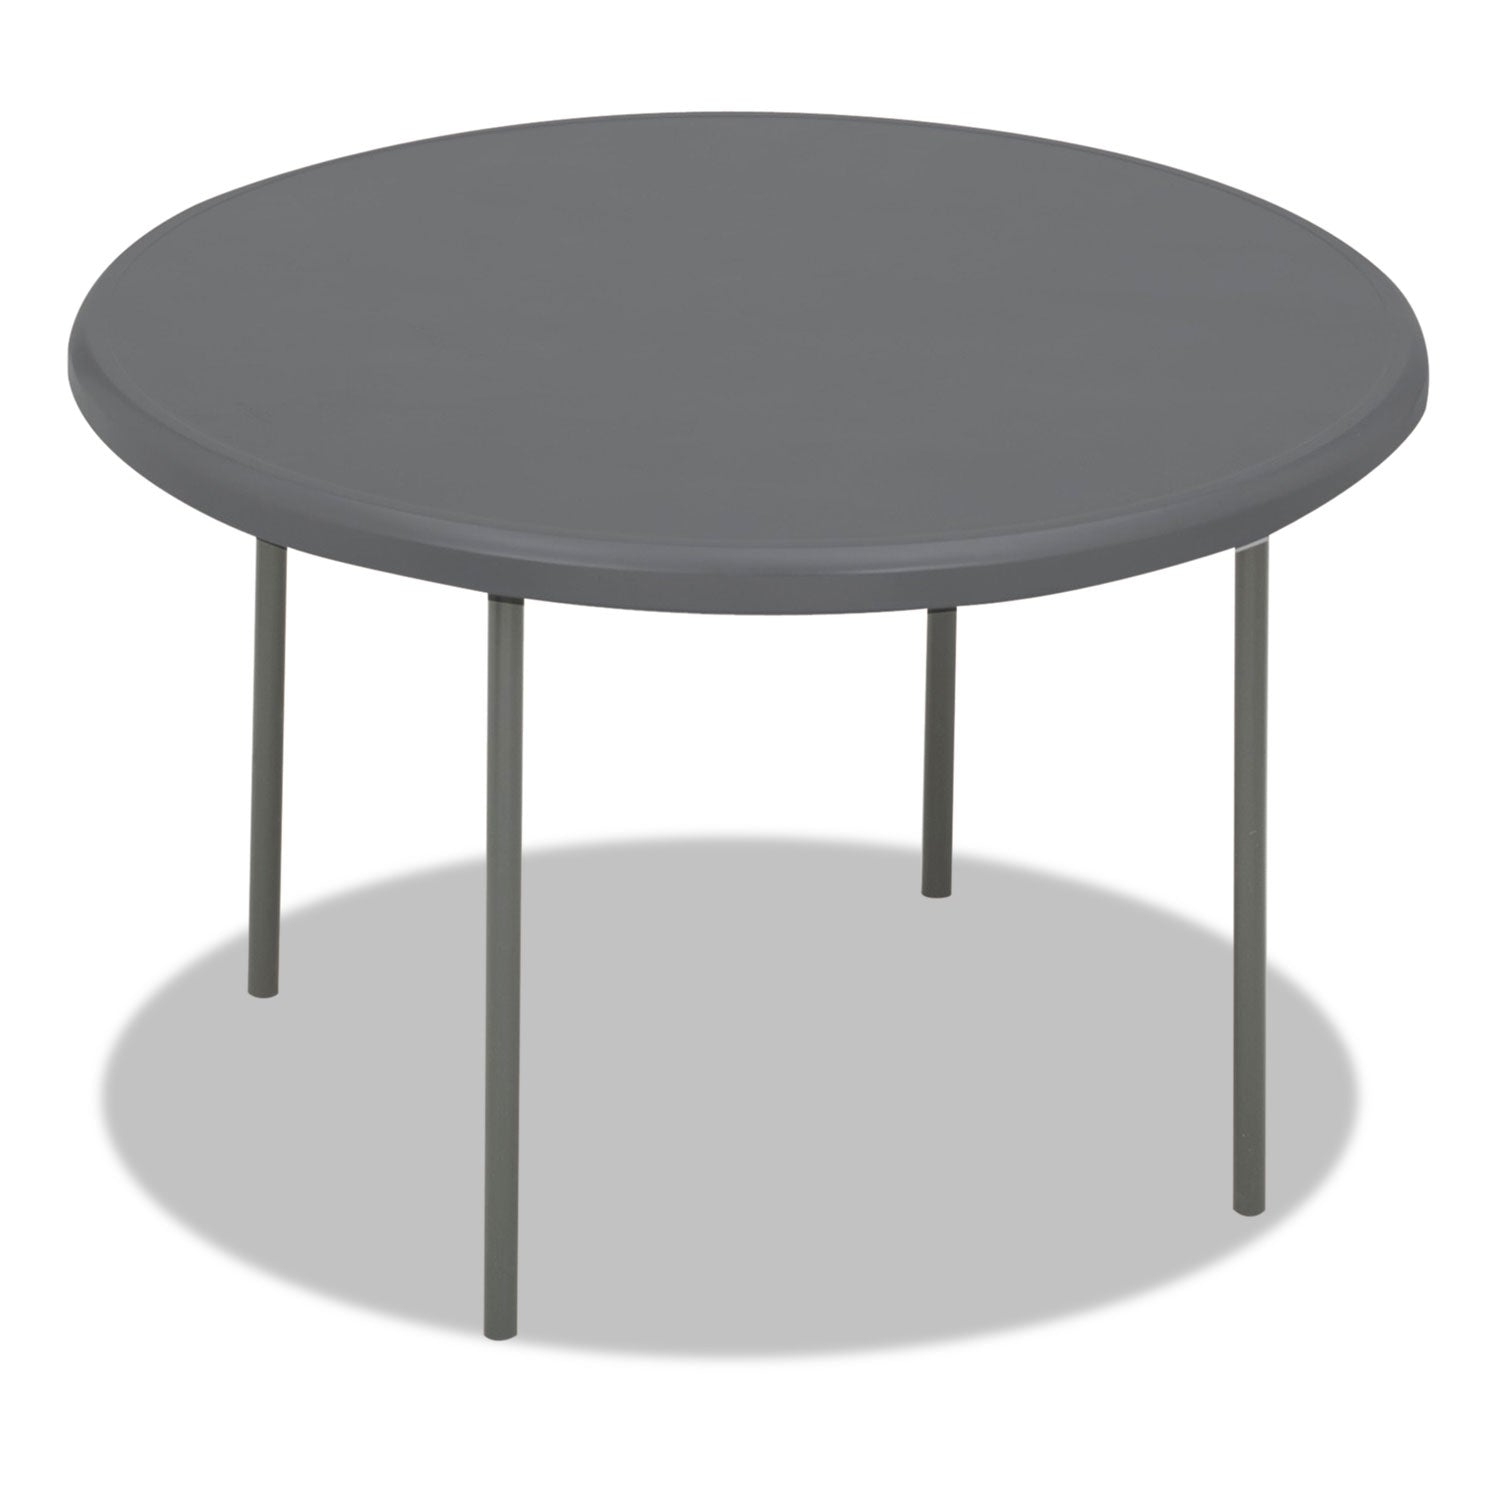 IndestrucTable Classic Folding Table, Round, 48" x 29", Charcoal - 